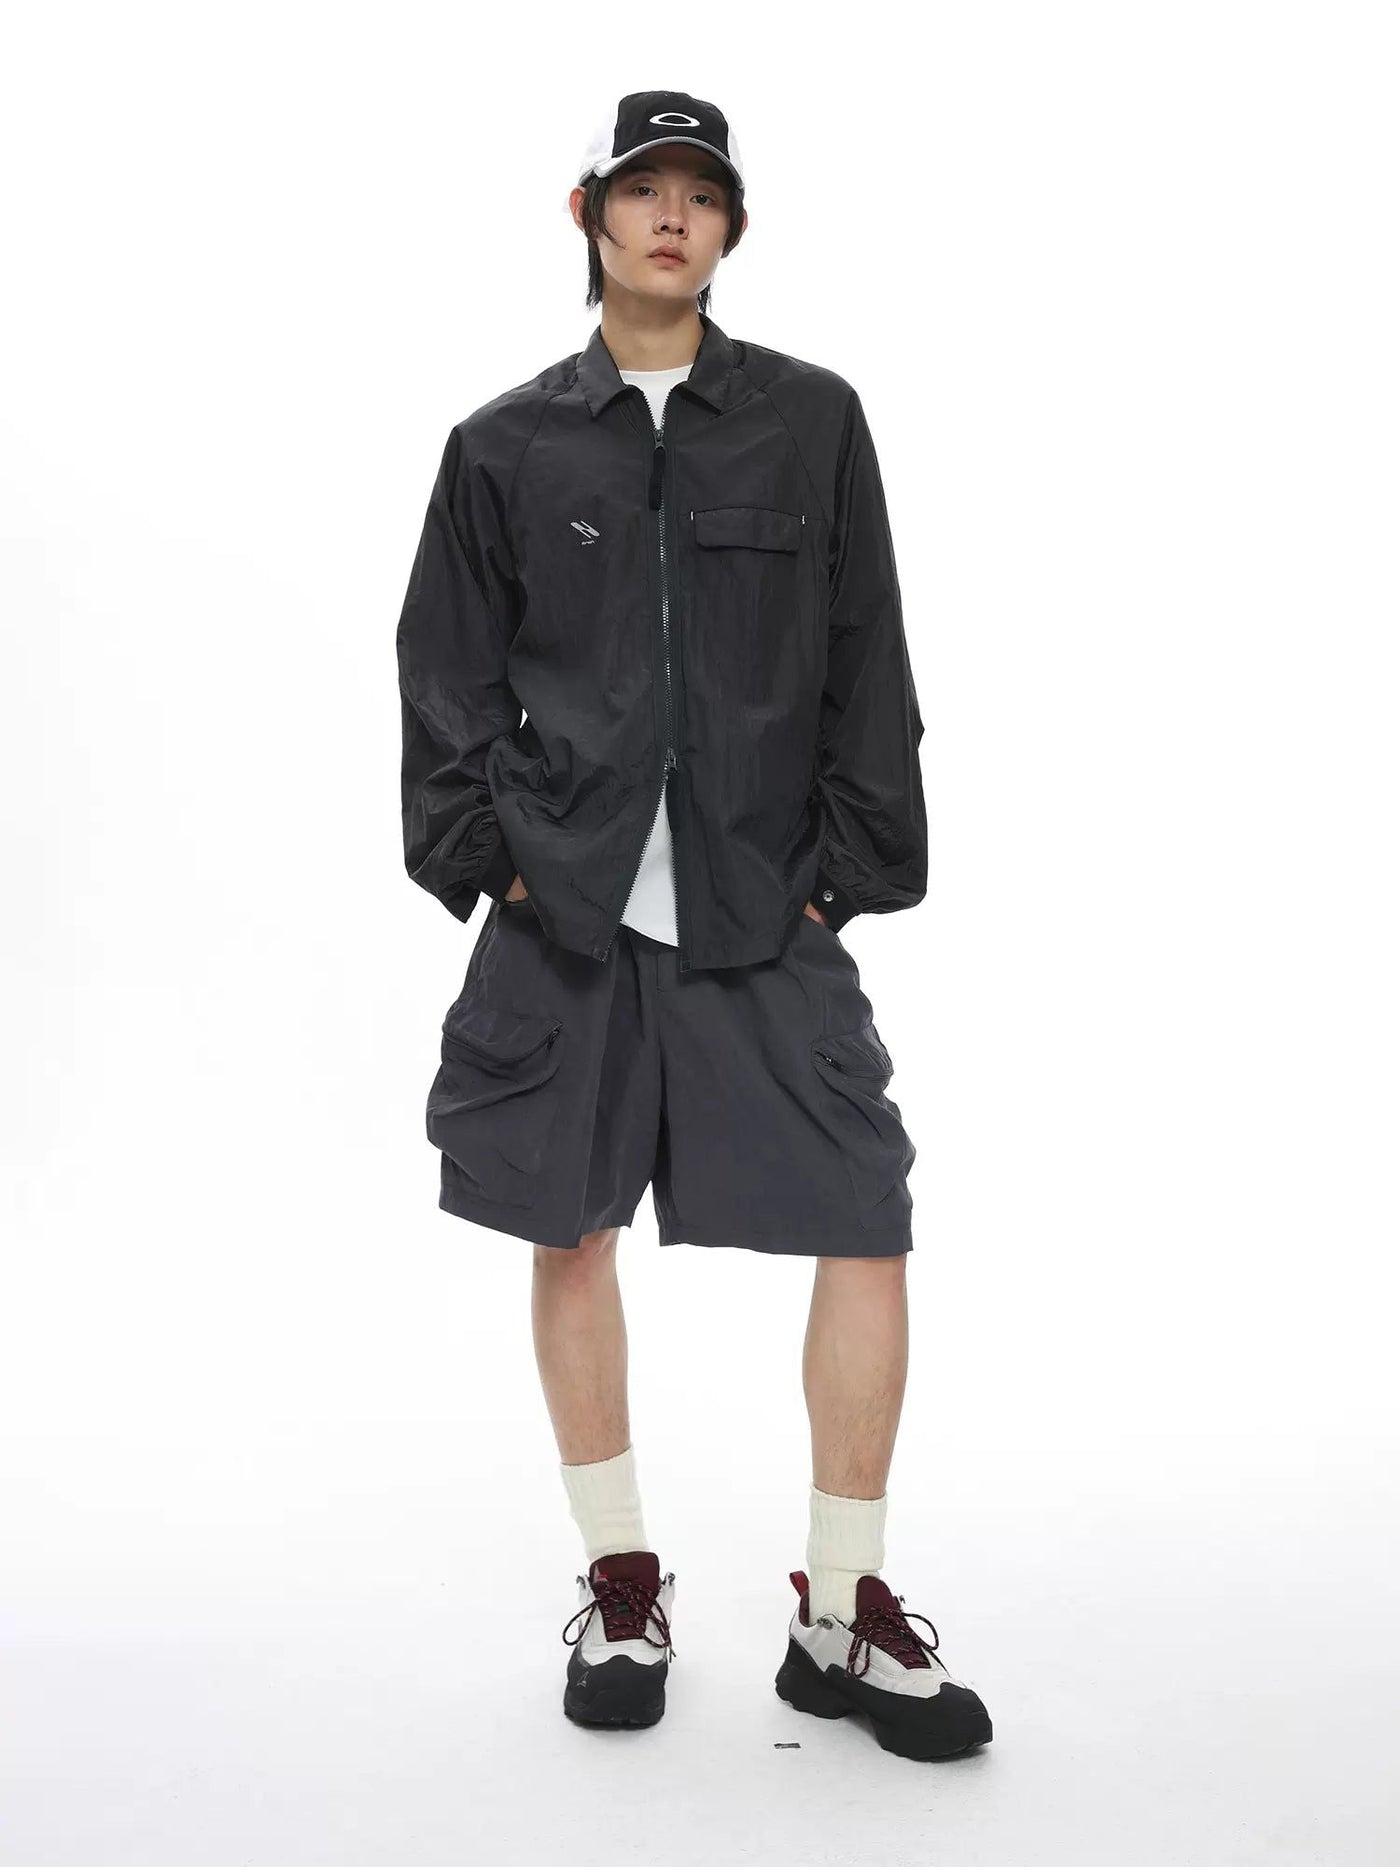 Quick Dry Zipped Pocket Shorts Korean Street Fashion Shorts By Roaring Wild Shop Online at OH Vault